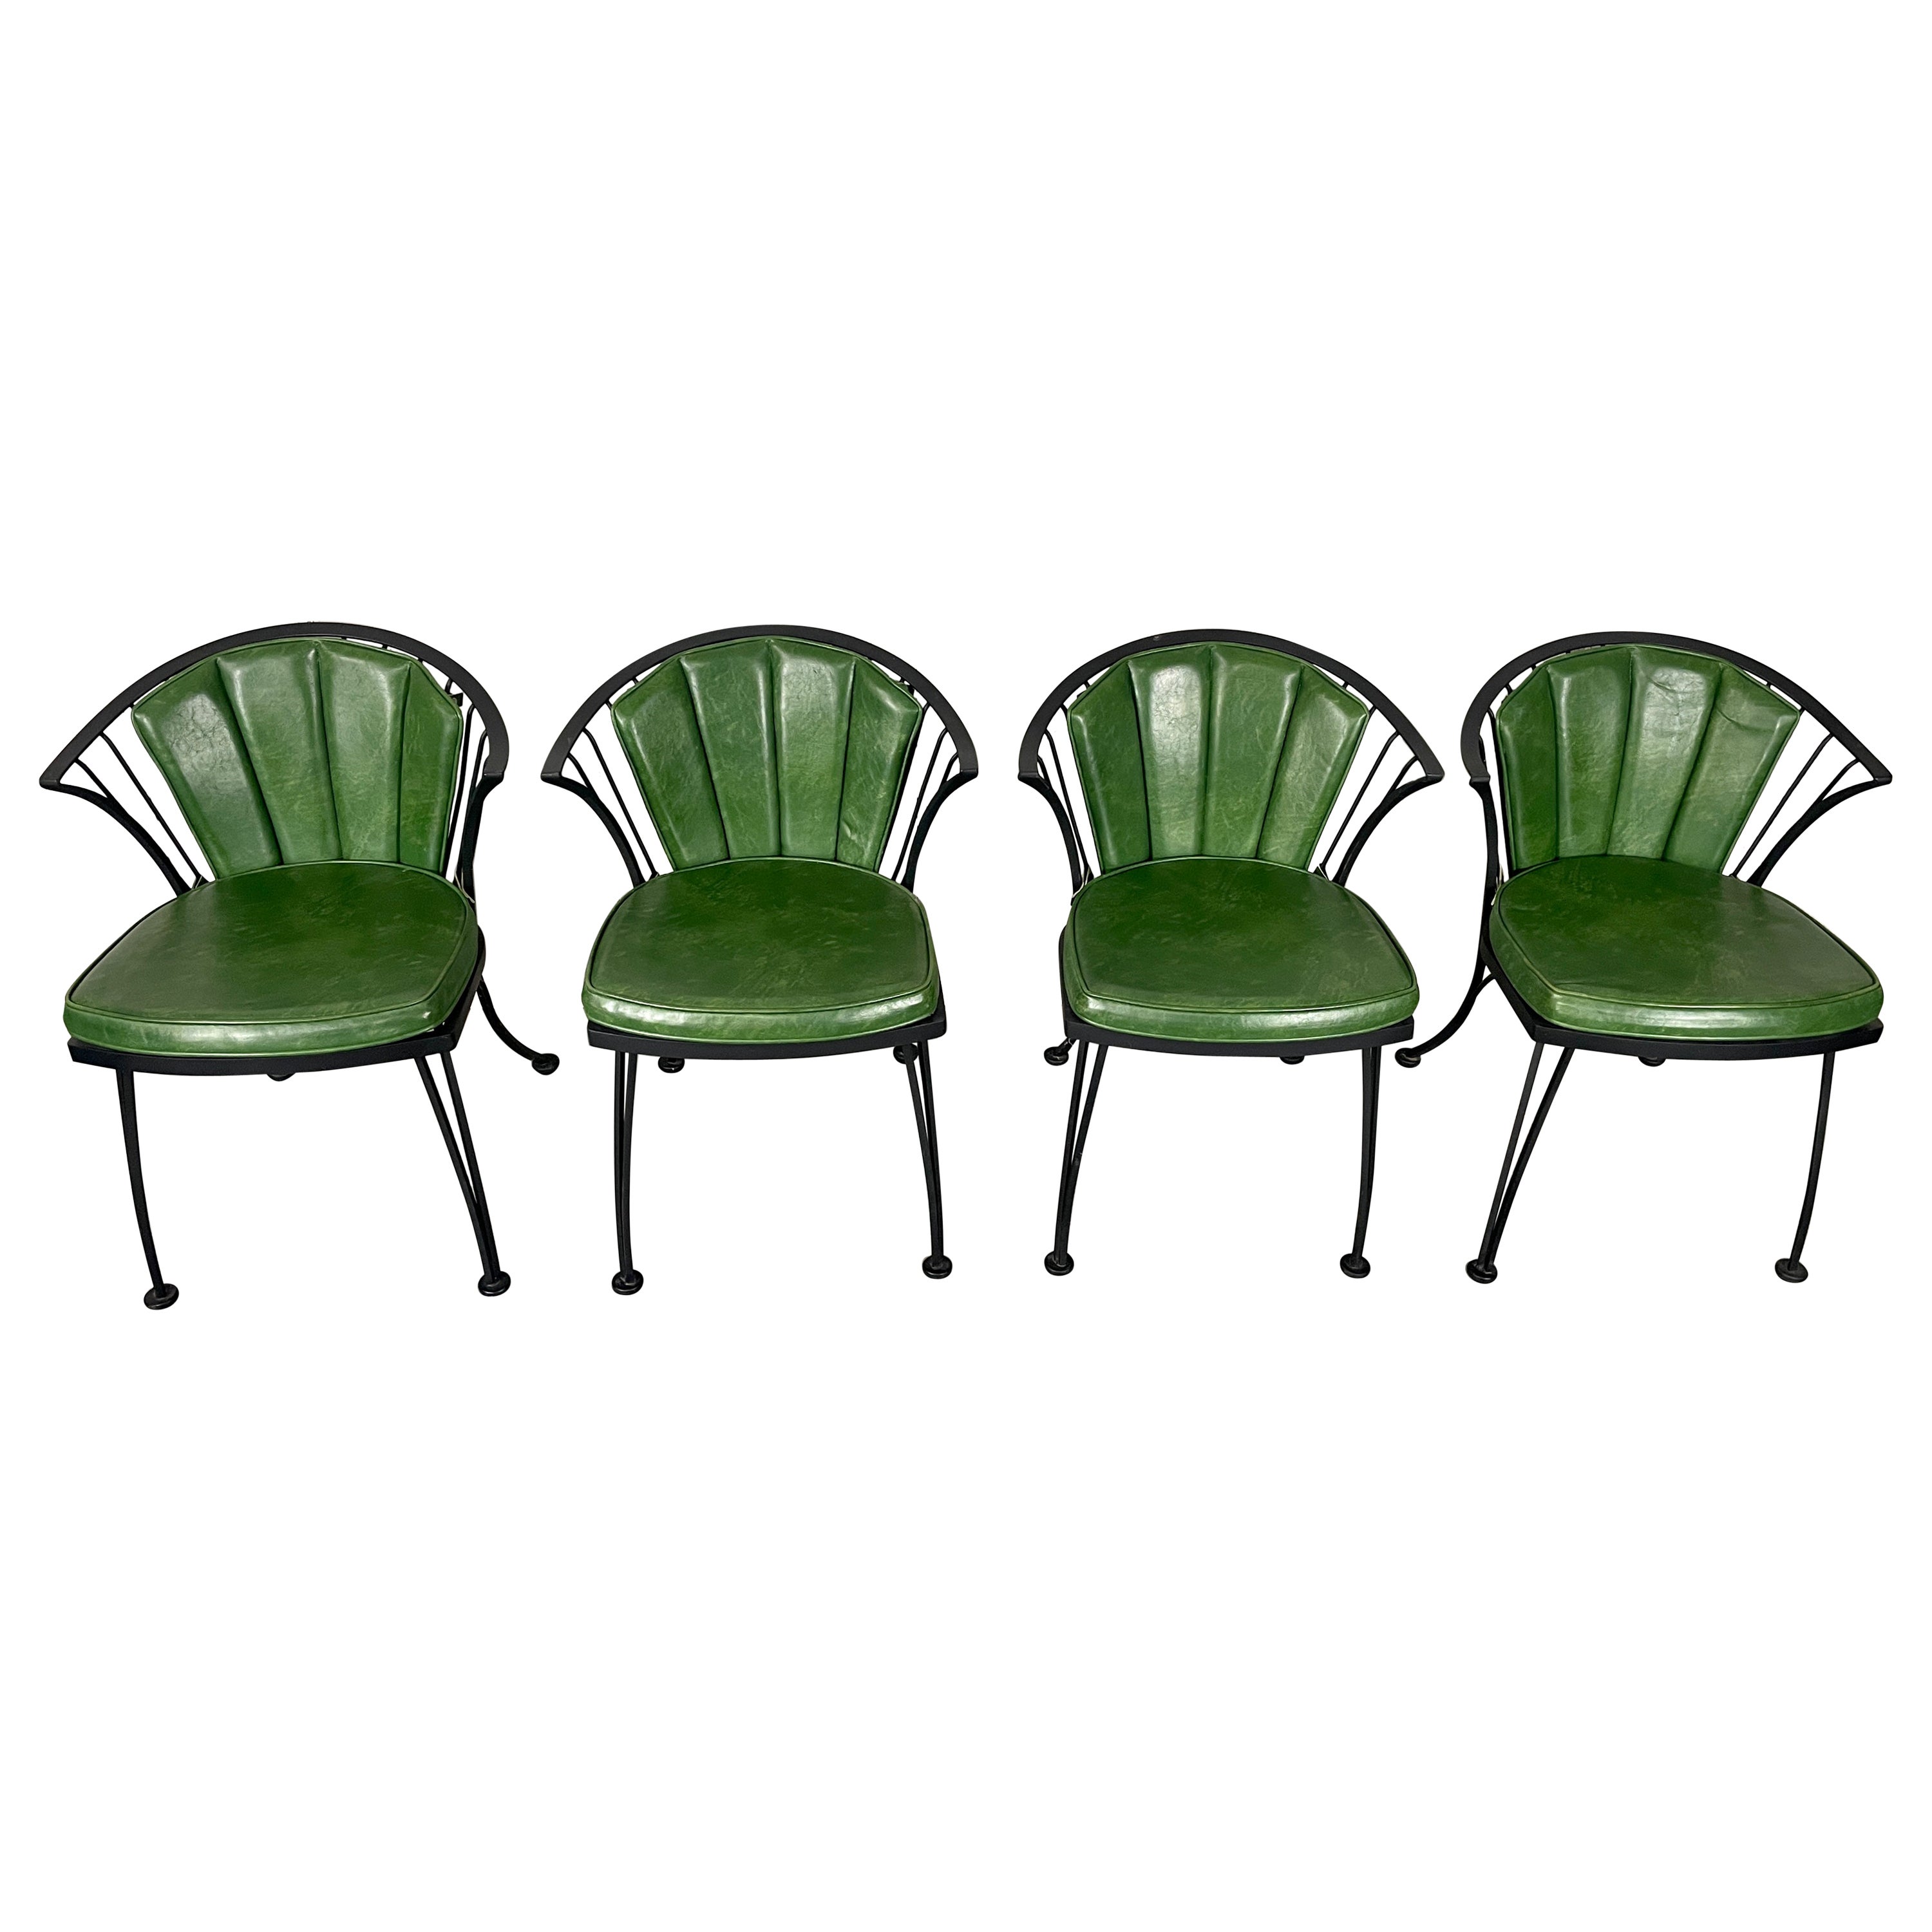 Woodard "Pincrest" Dining Chairs